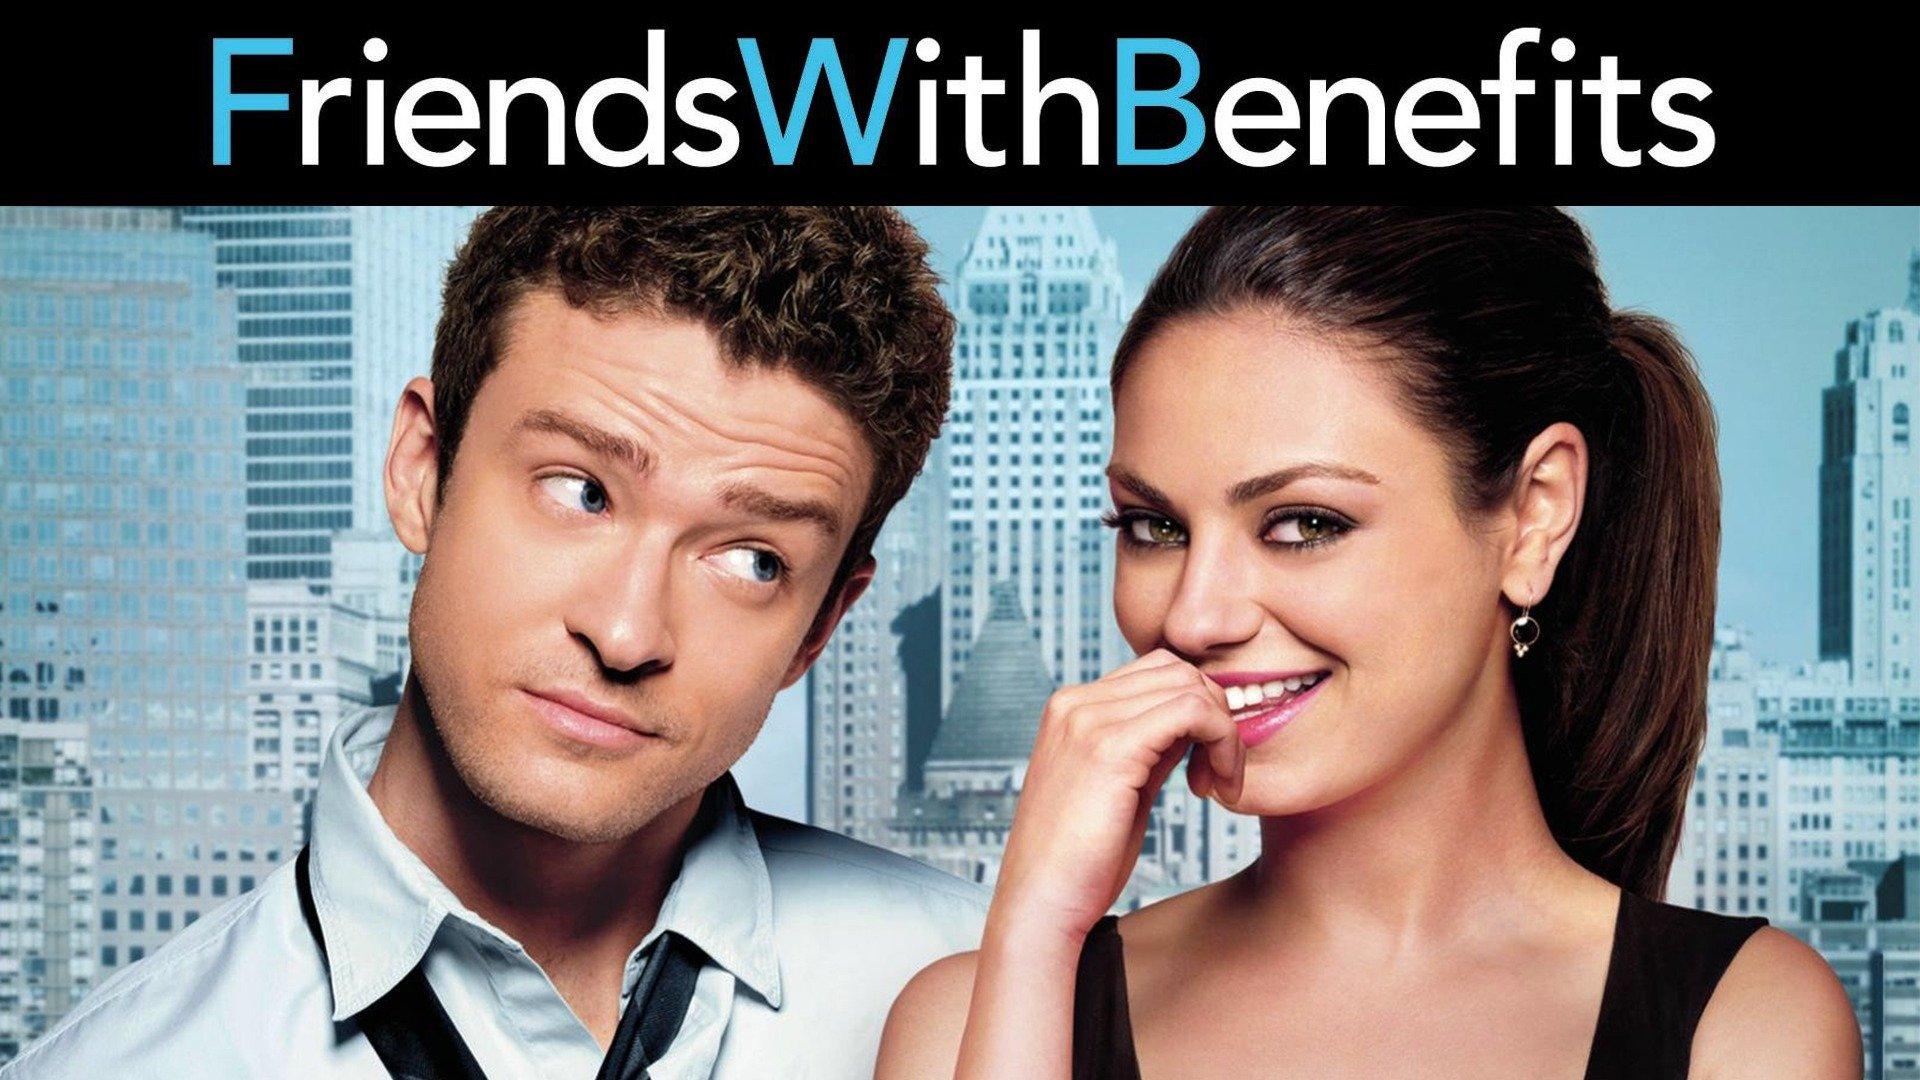 Watch Friends With Benefits Streaming Online on Philo (Free Trial)